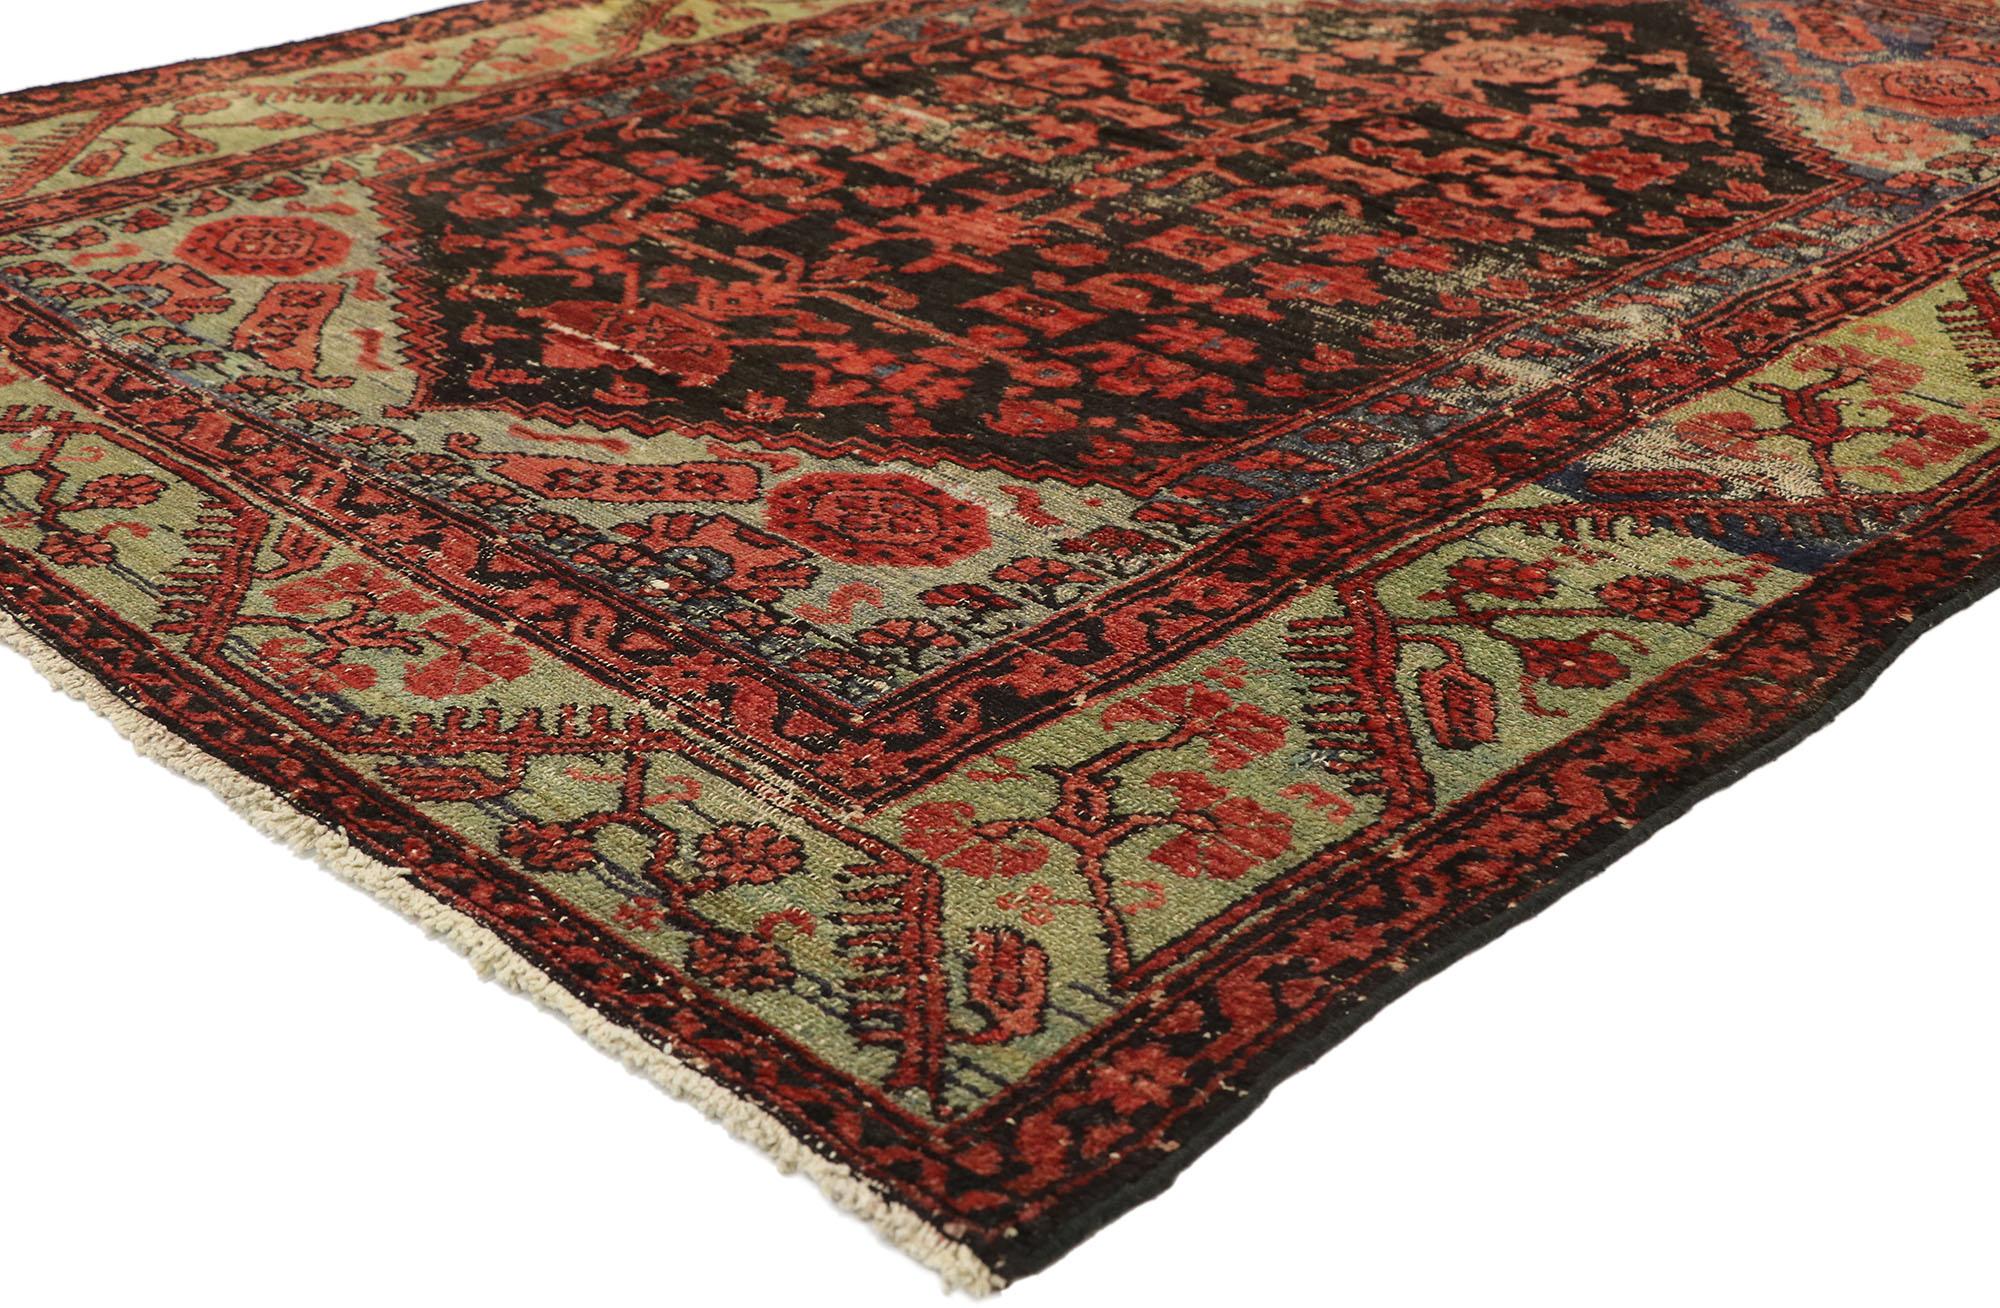 51214 Distressed Vintage Turkish Oushak rug with Modern Rustic Industrial style. With a timeless design and nostalgic charm, this hand knotted wool distressed vintage Turkish Oushak rug can beautifully blend modern, contemporary and traditional